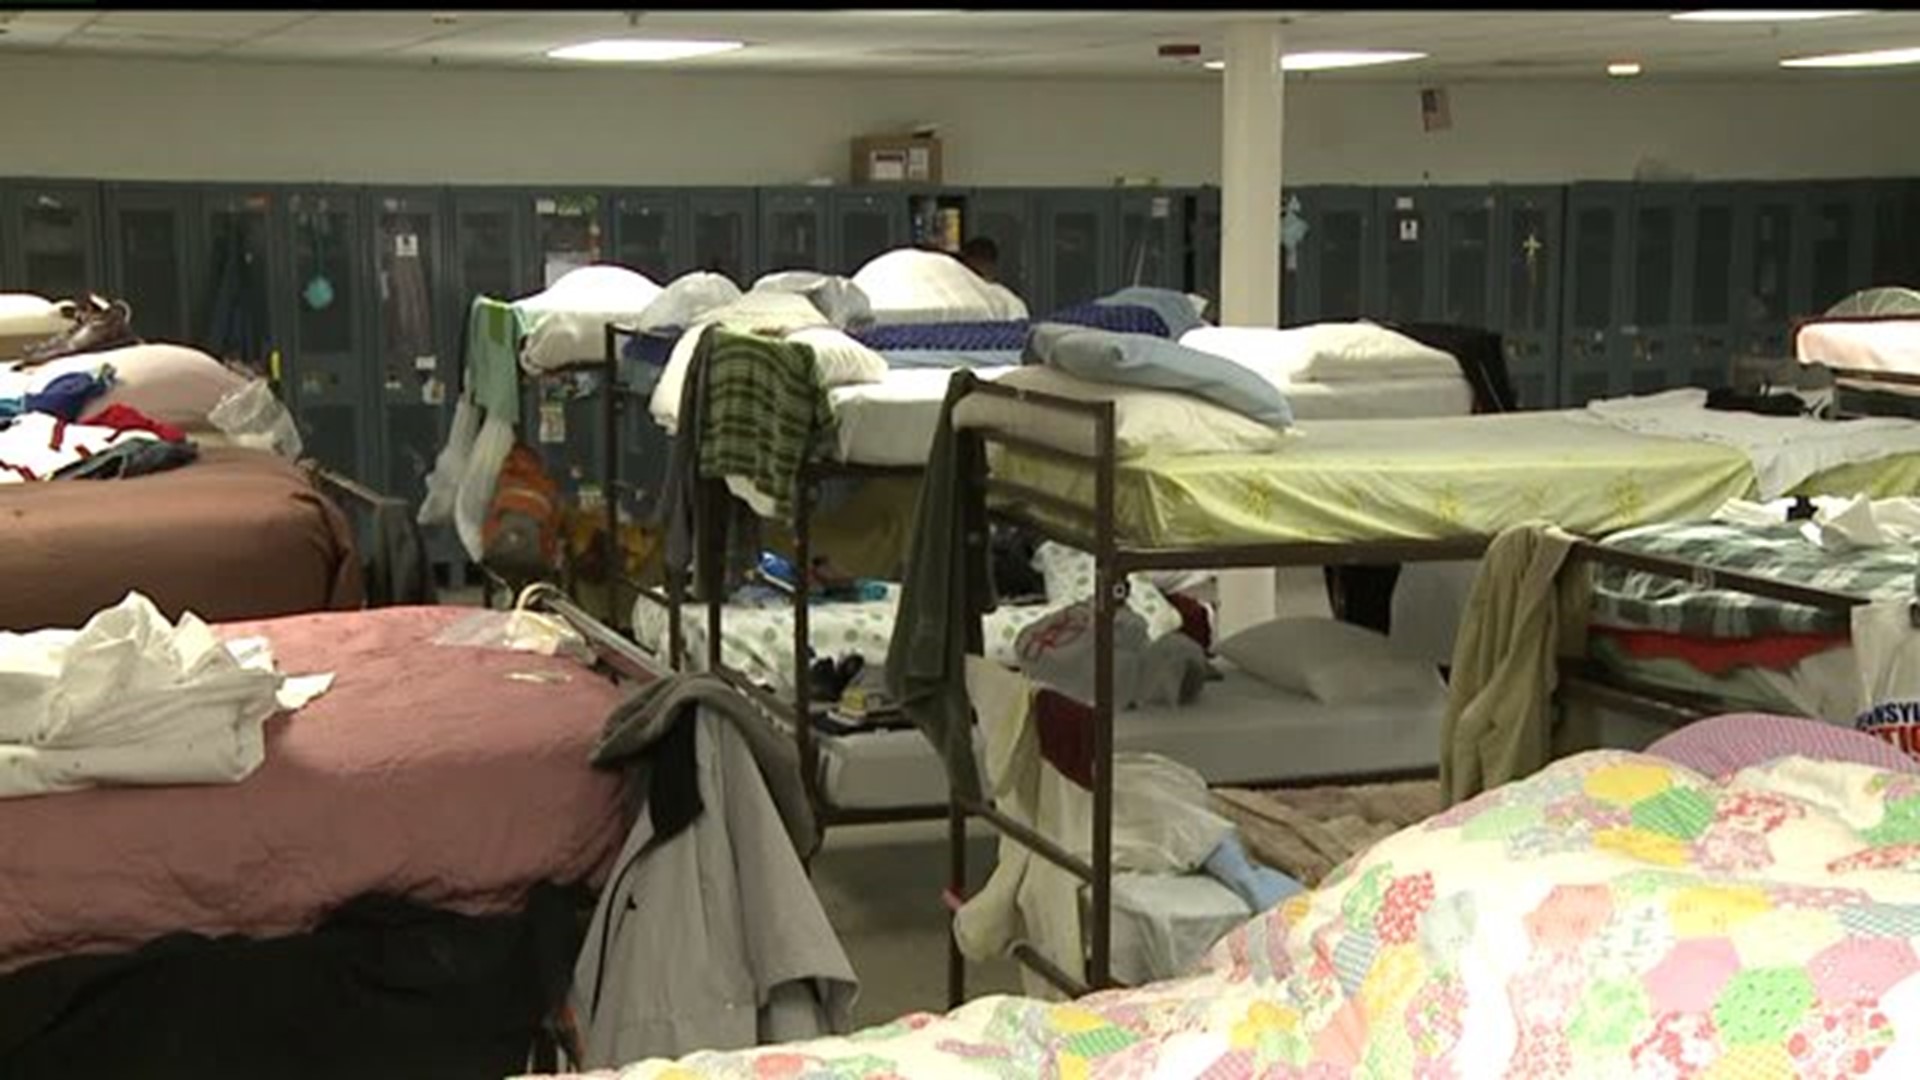 Grant approved to support homeless programs in Harrisburg